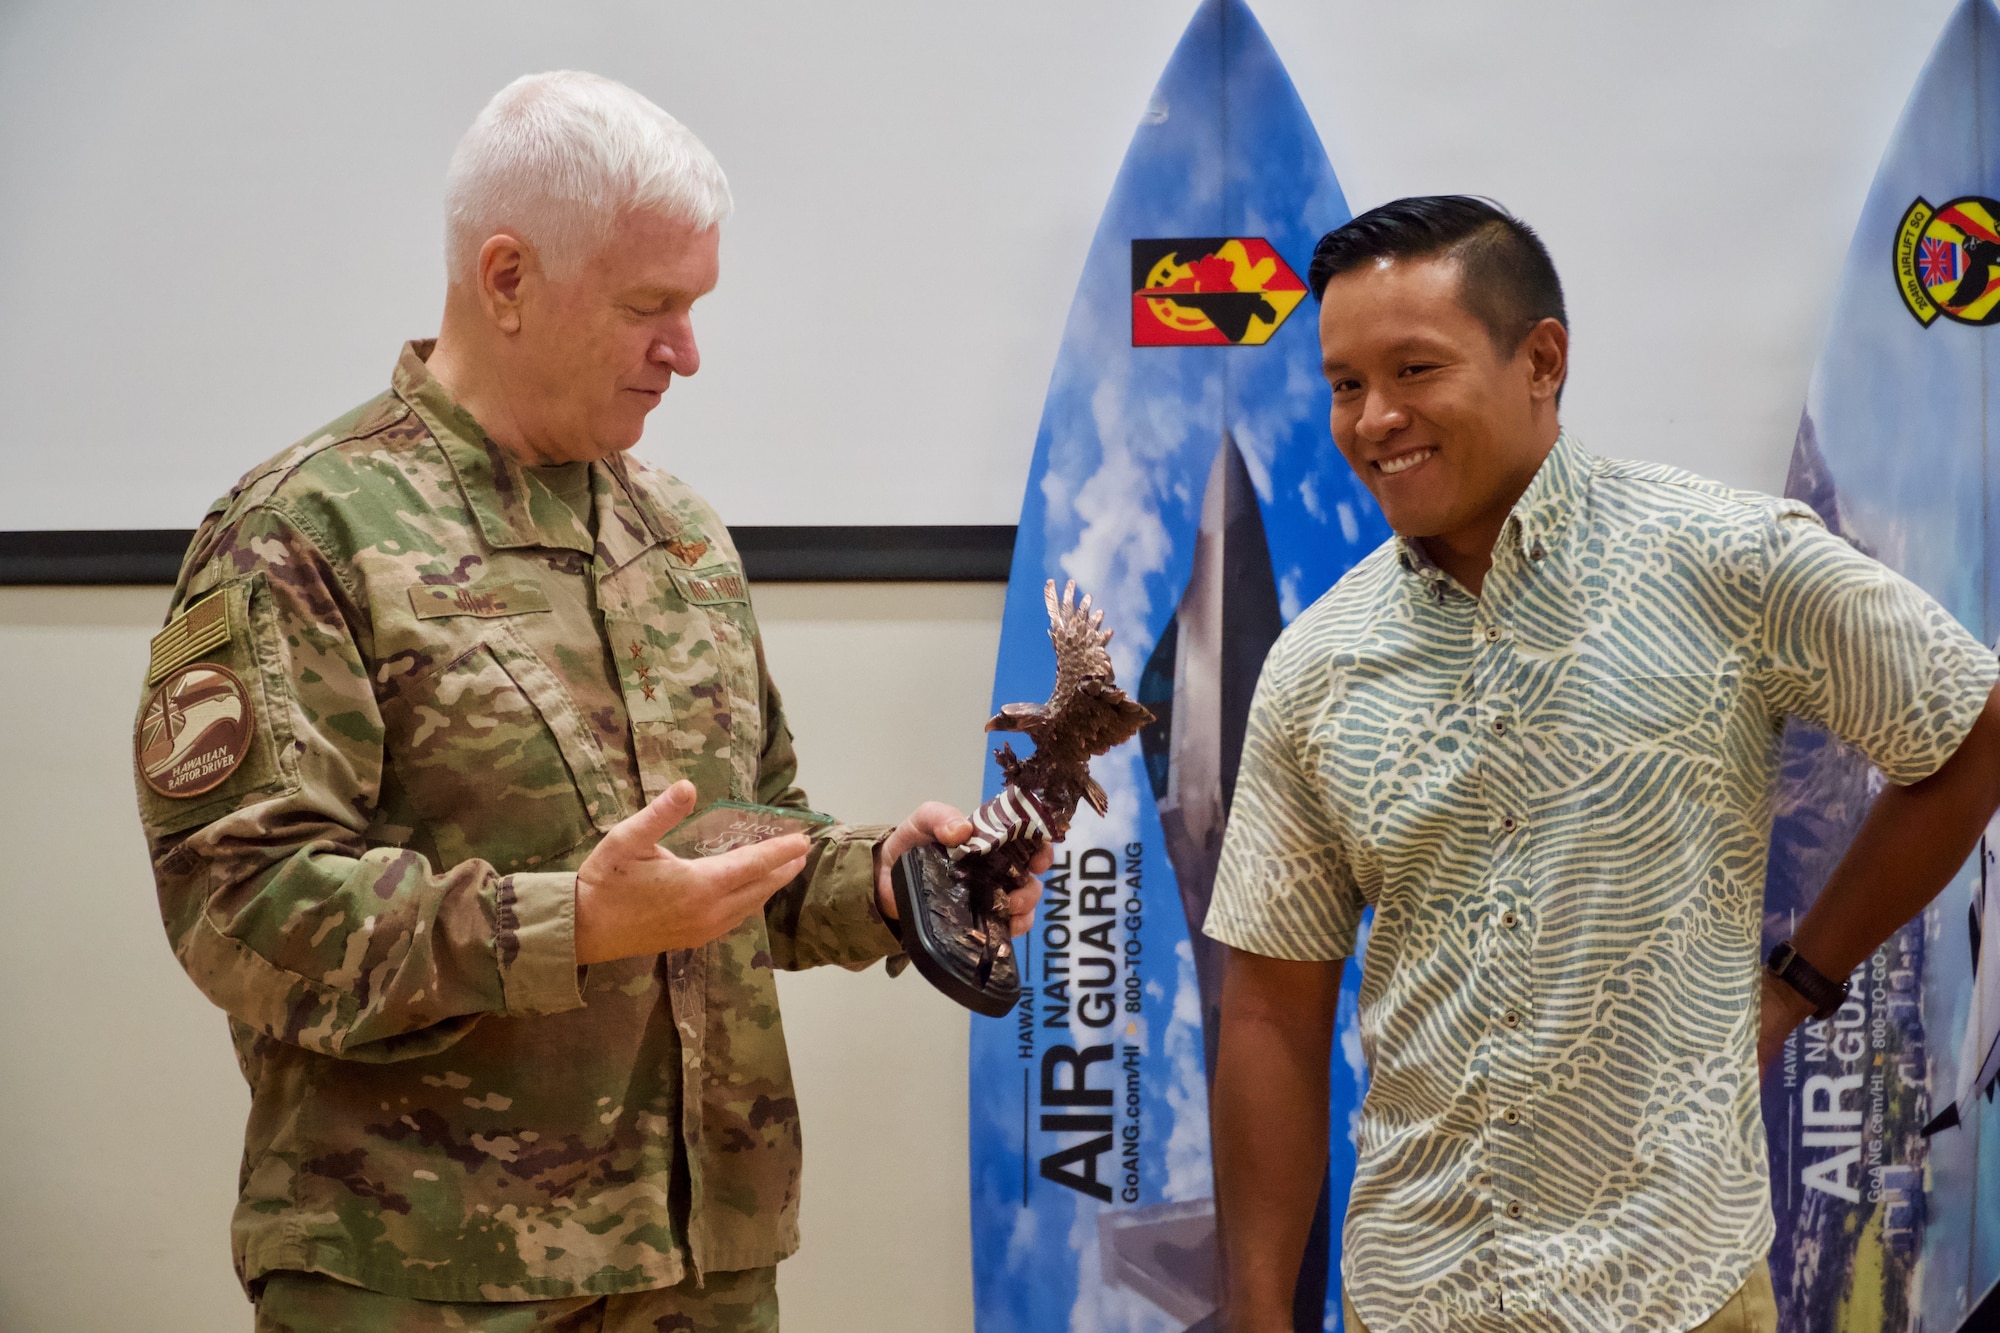 Lt. Gen. L. Scott Rice, Director of the Air National Guard, prepares to present Airman 1st Class Noel Tadeo 169th Air Defense Group command and control battle management operator, with the C2 Battle Management Operations Airmen of the year award on June 21, 2019 at Joint Base Pearl Harbor-Hickam.